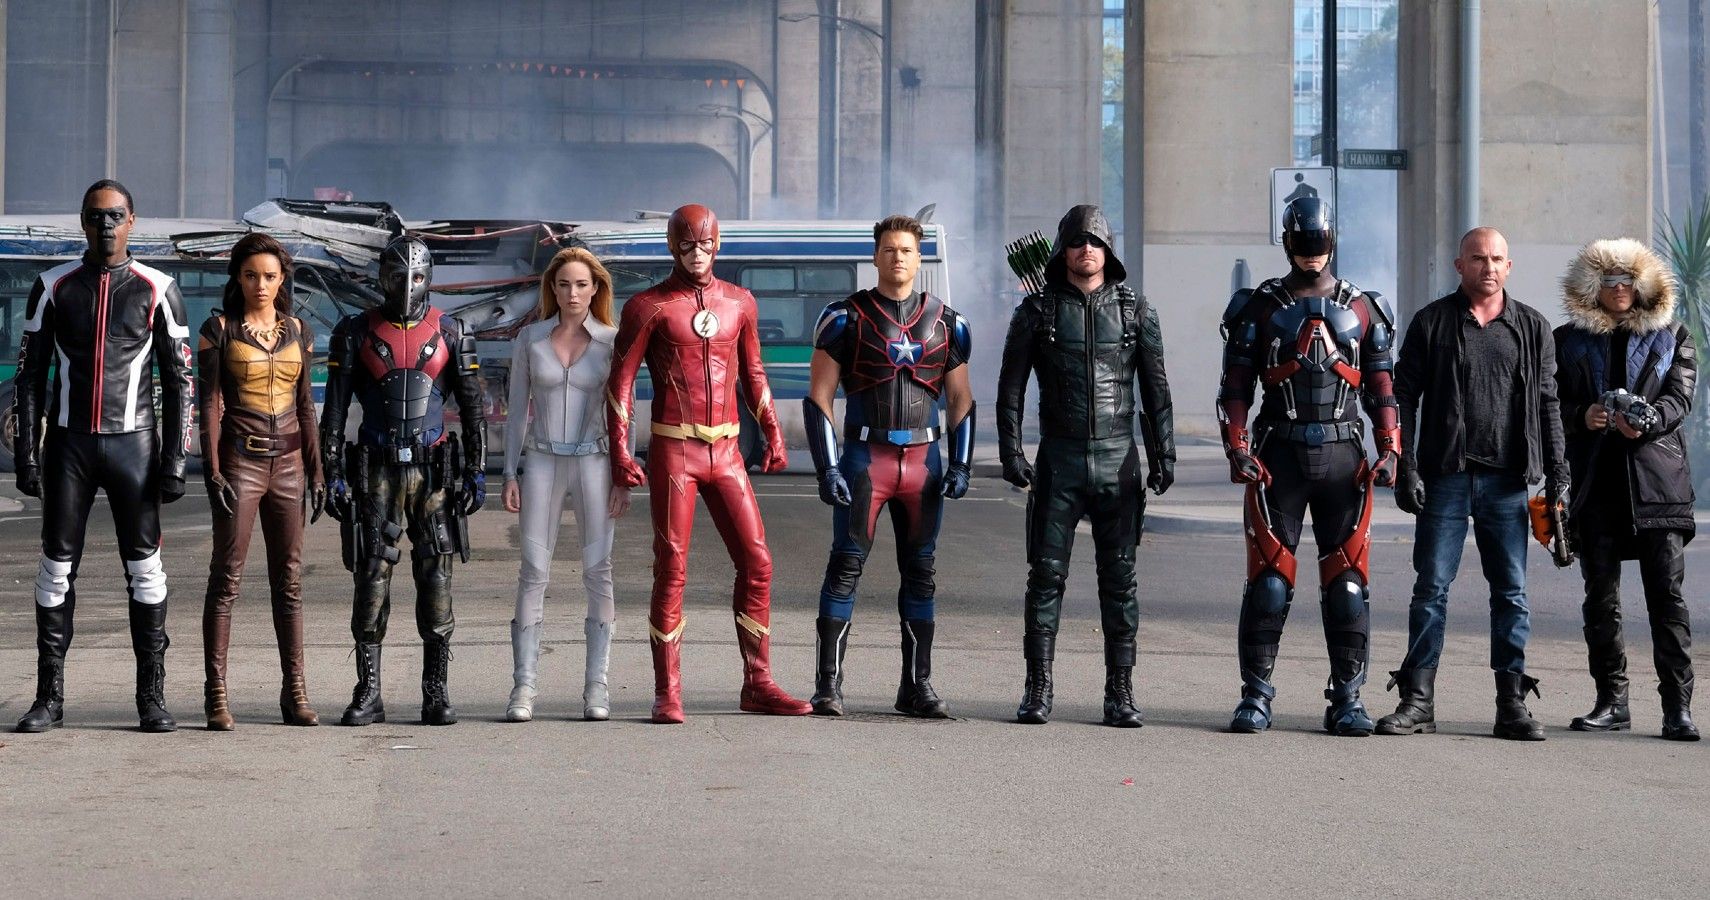 The cast of the various Arrowverse shows